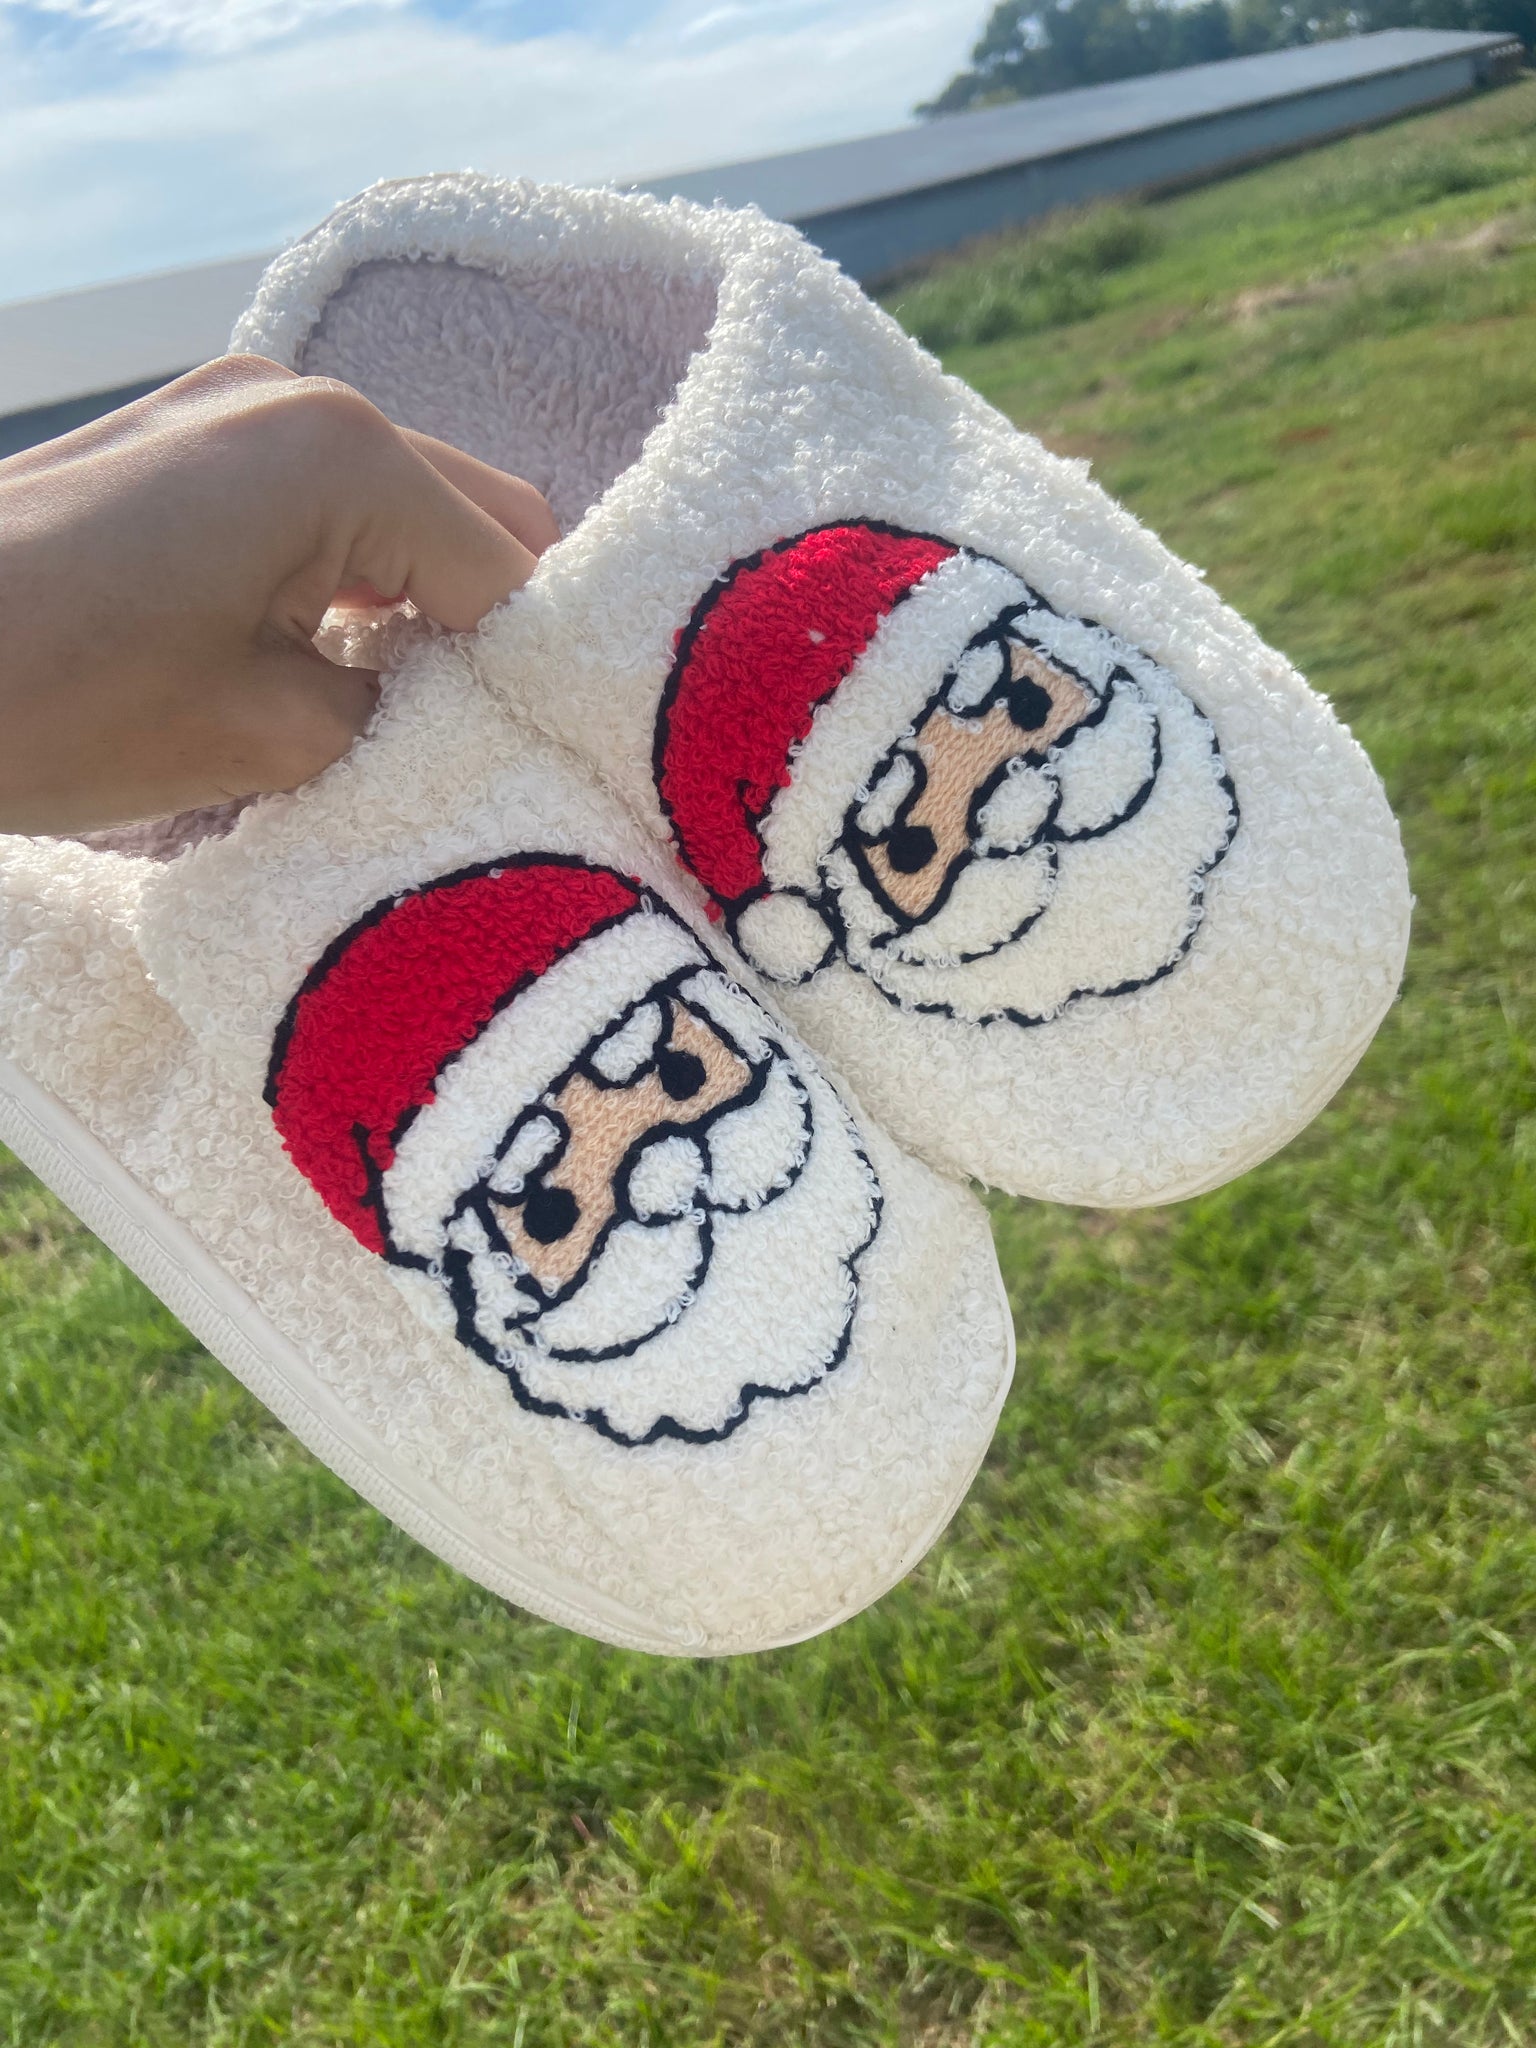 Christmas slippers READY TO SHIP